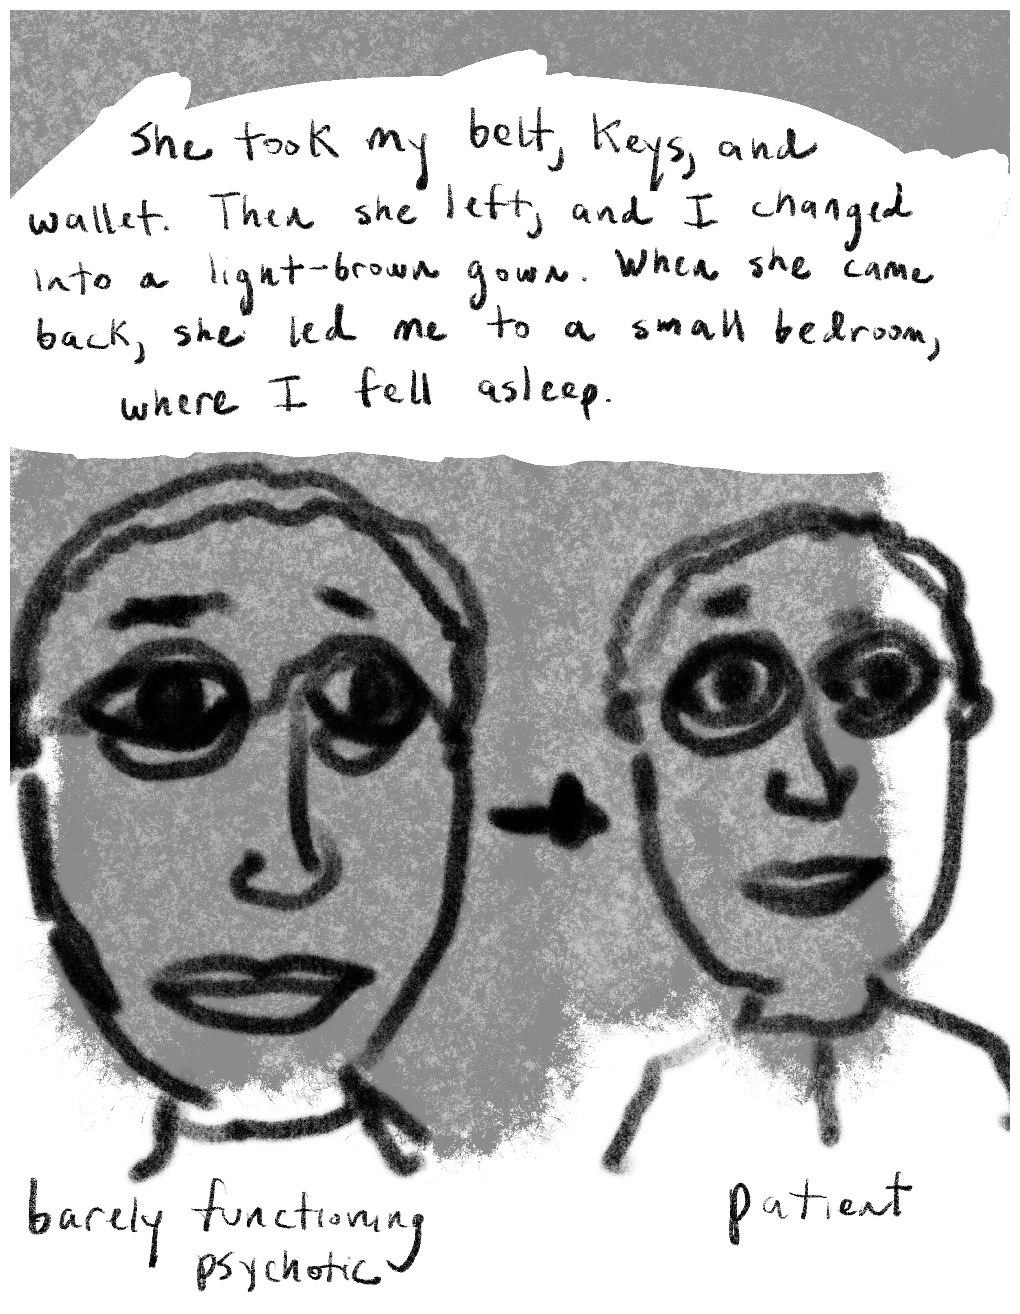 Panel three of a four-panel comic called 'From psychotic to patient', consisting of thick black line drawing and hand written text against a mottled grey and white background. The heads and shoulders of two crudely drawn figures  stand side by side, looking out at the viewer. Both have short hair and glasses and neutral expressions. A black arrow points from the left figure to the right figure. Beneath the lefthand figure is written "barely functioning psychotic" and beneath the righthand figure is written "patient". Text above the two figures reads "She took my belt, keys, and wallet. Then she left, and I changed into a light-brown gown. When she came back, she led me to a small bedroom, where I fell aspleep."